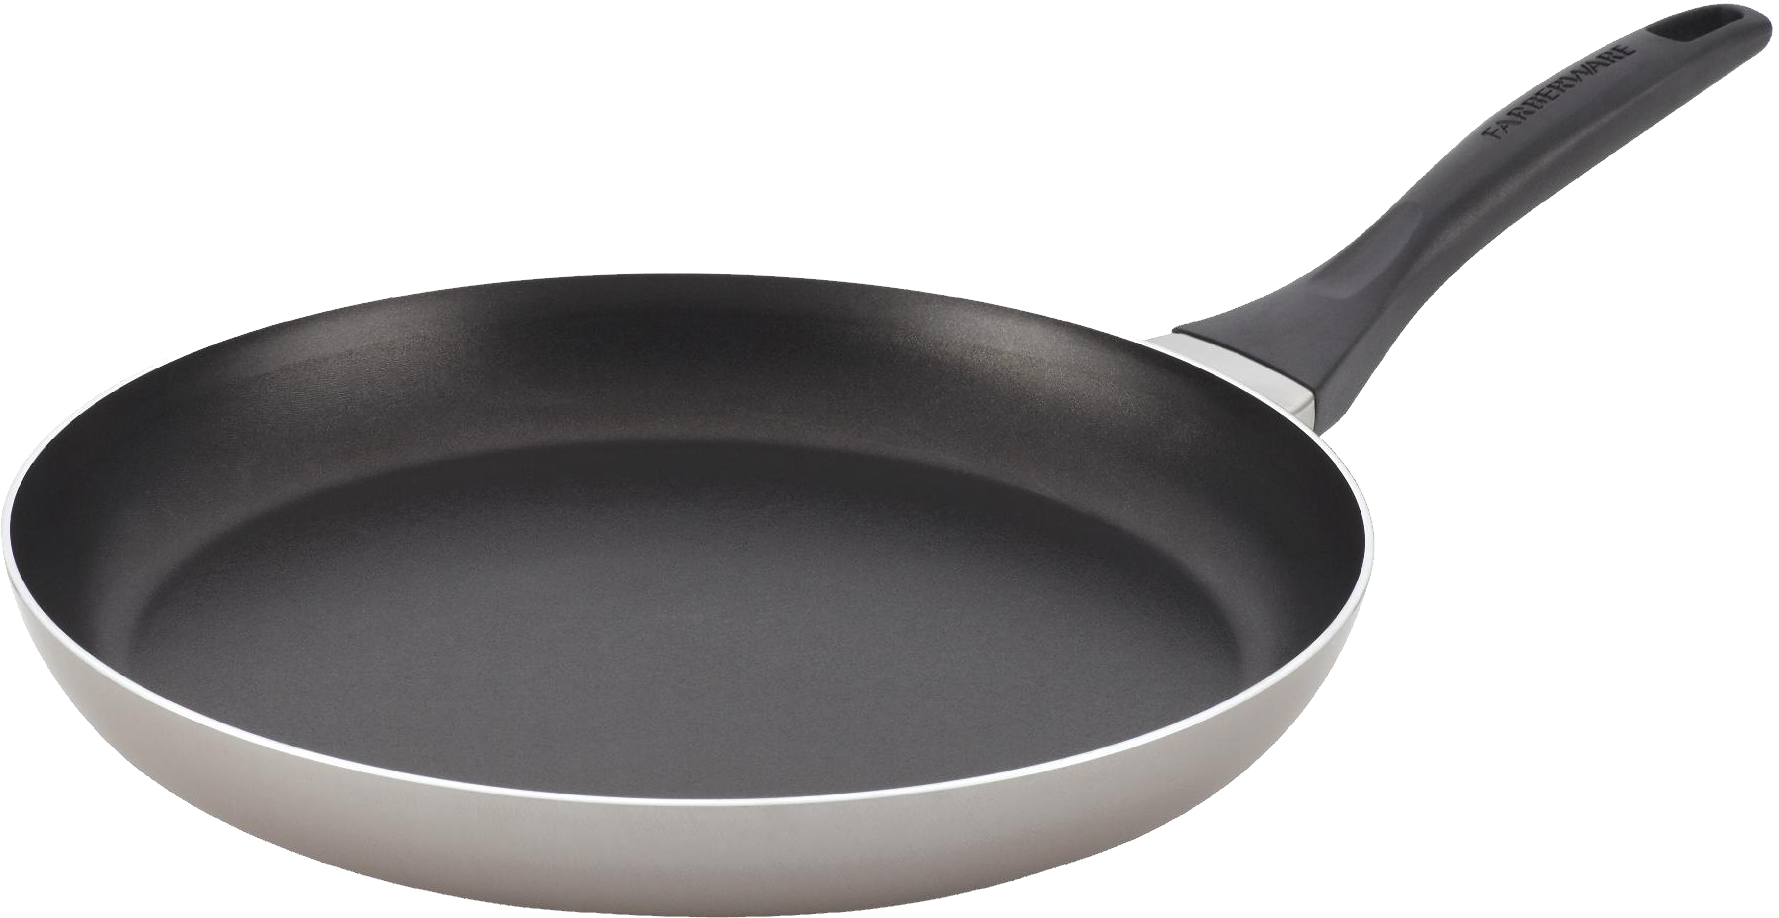 Download PNG image - Stainless Steel Frying Pan Transparent Background 